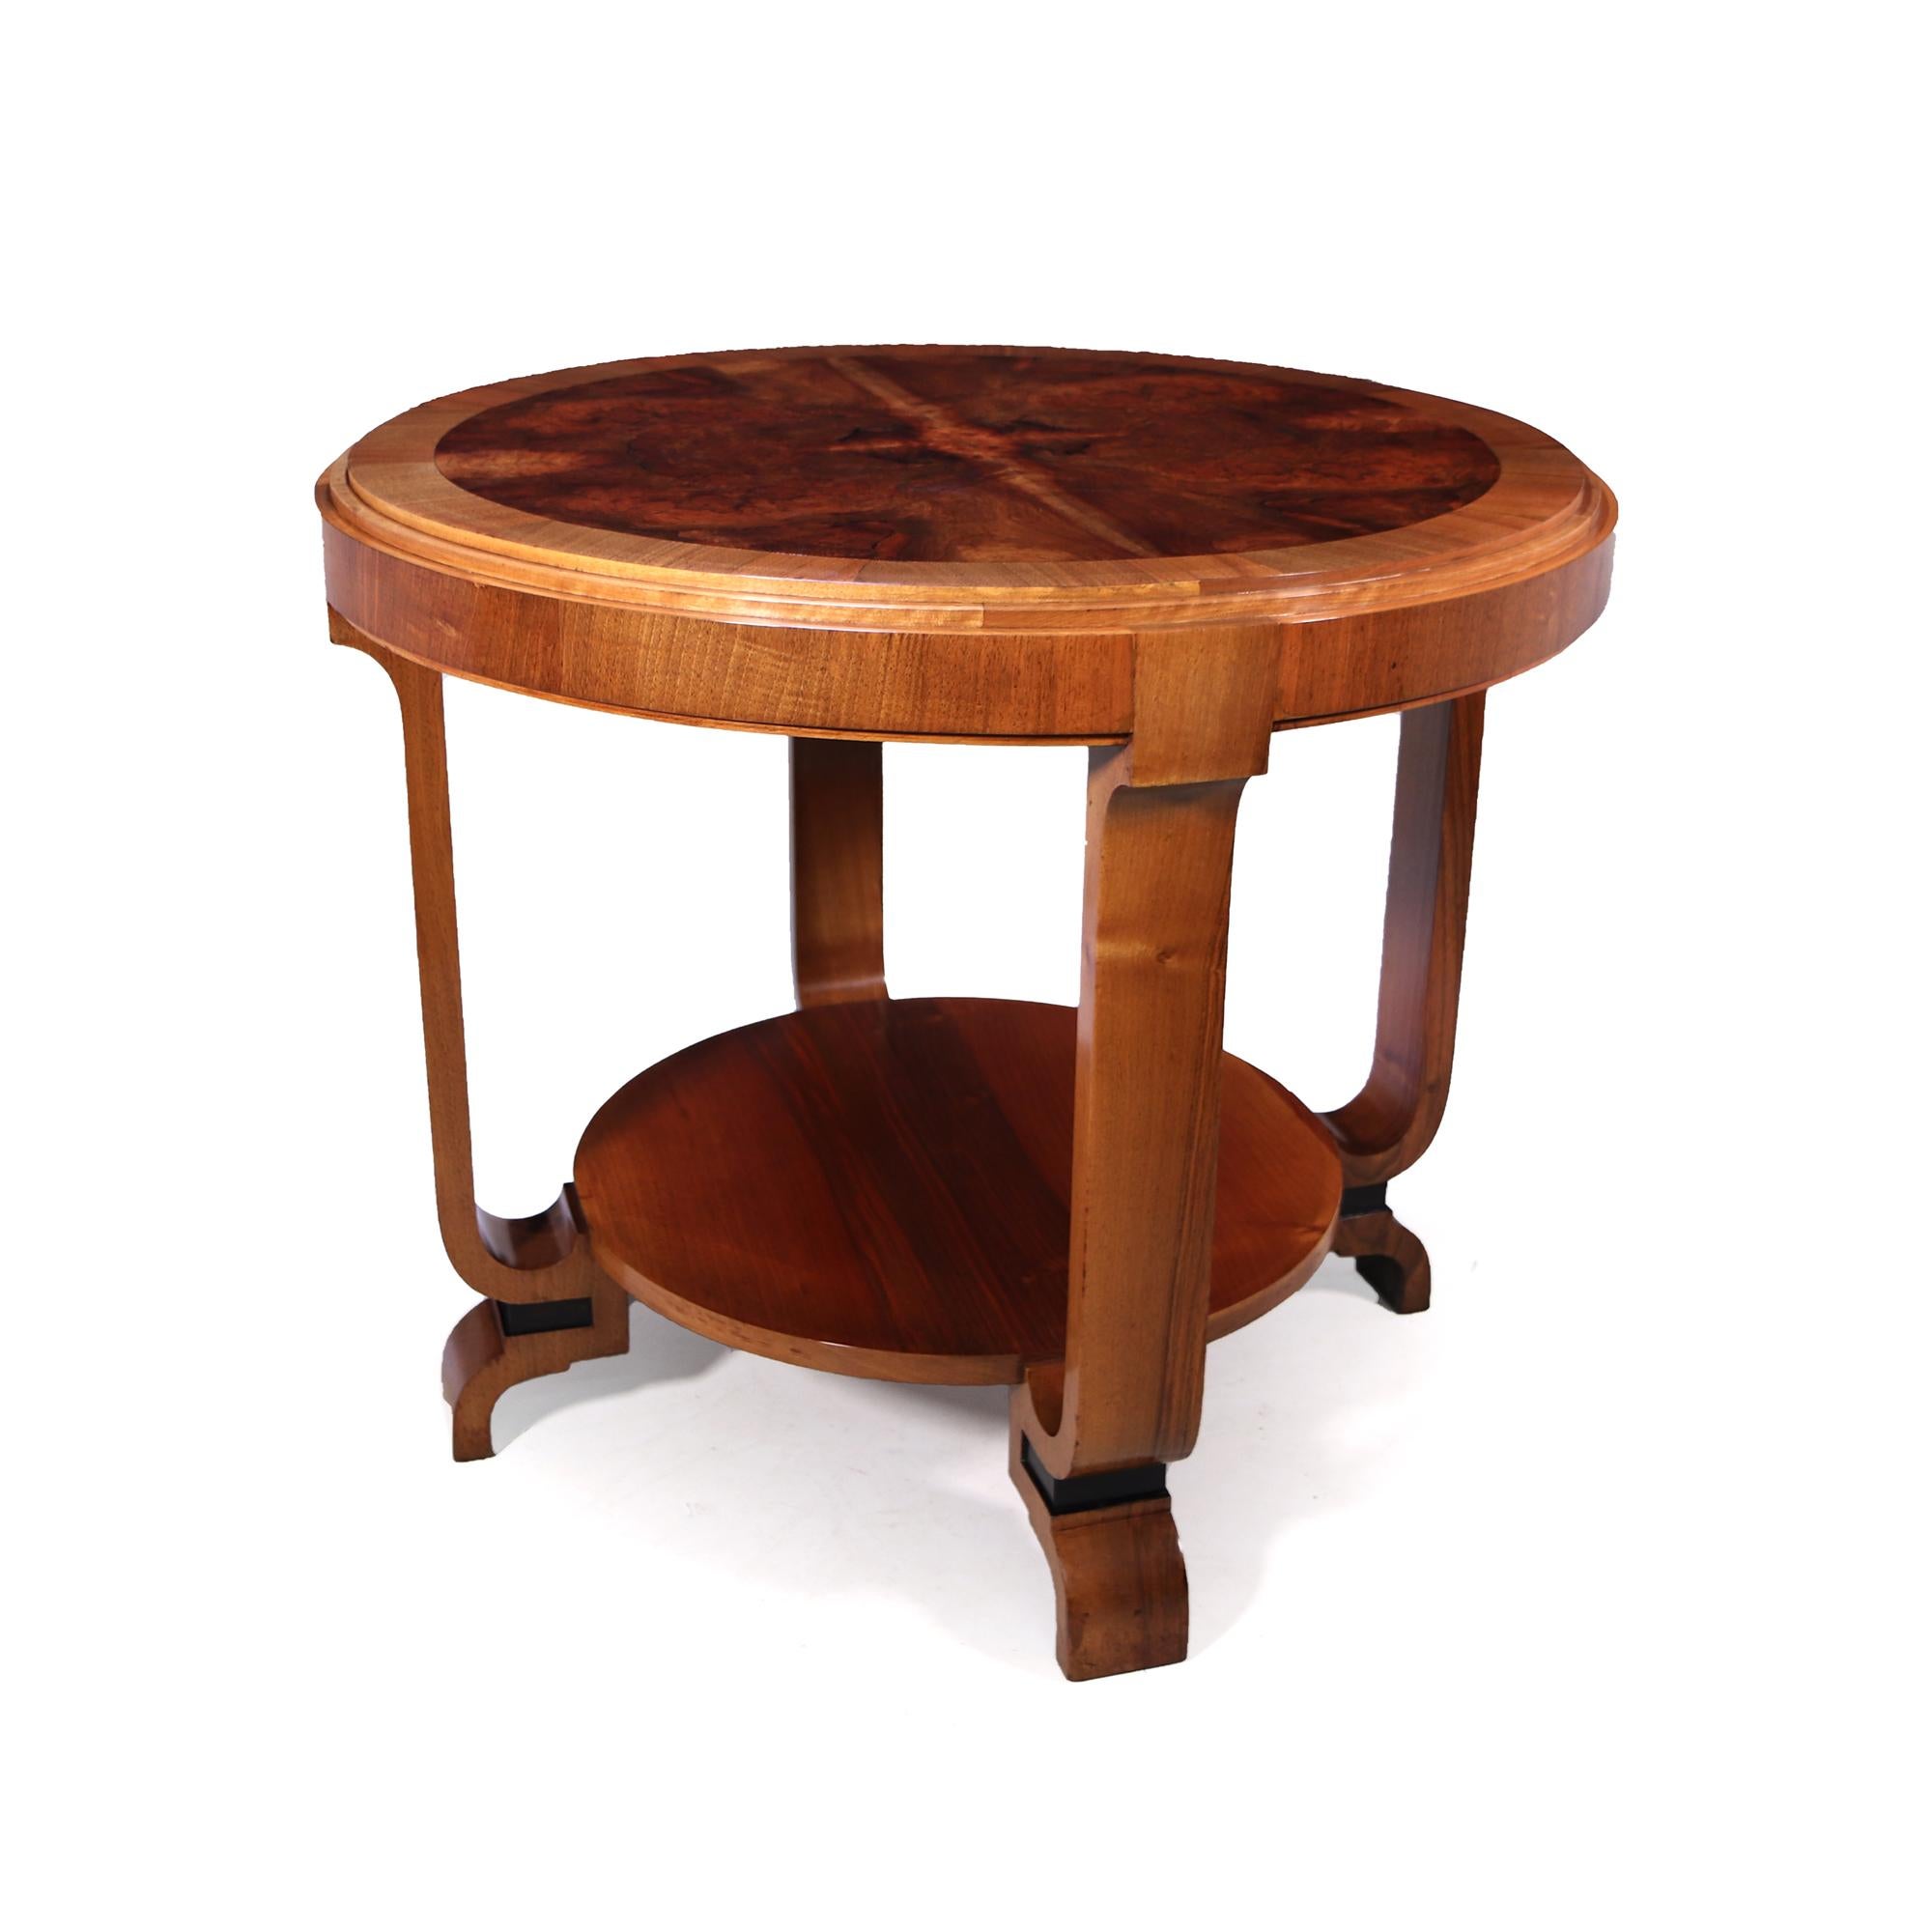 French Art Deco Center Table in Walnut